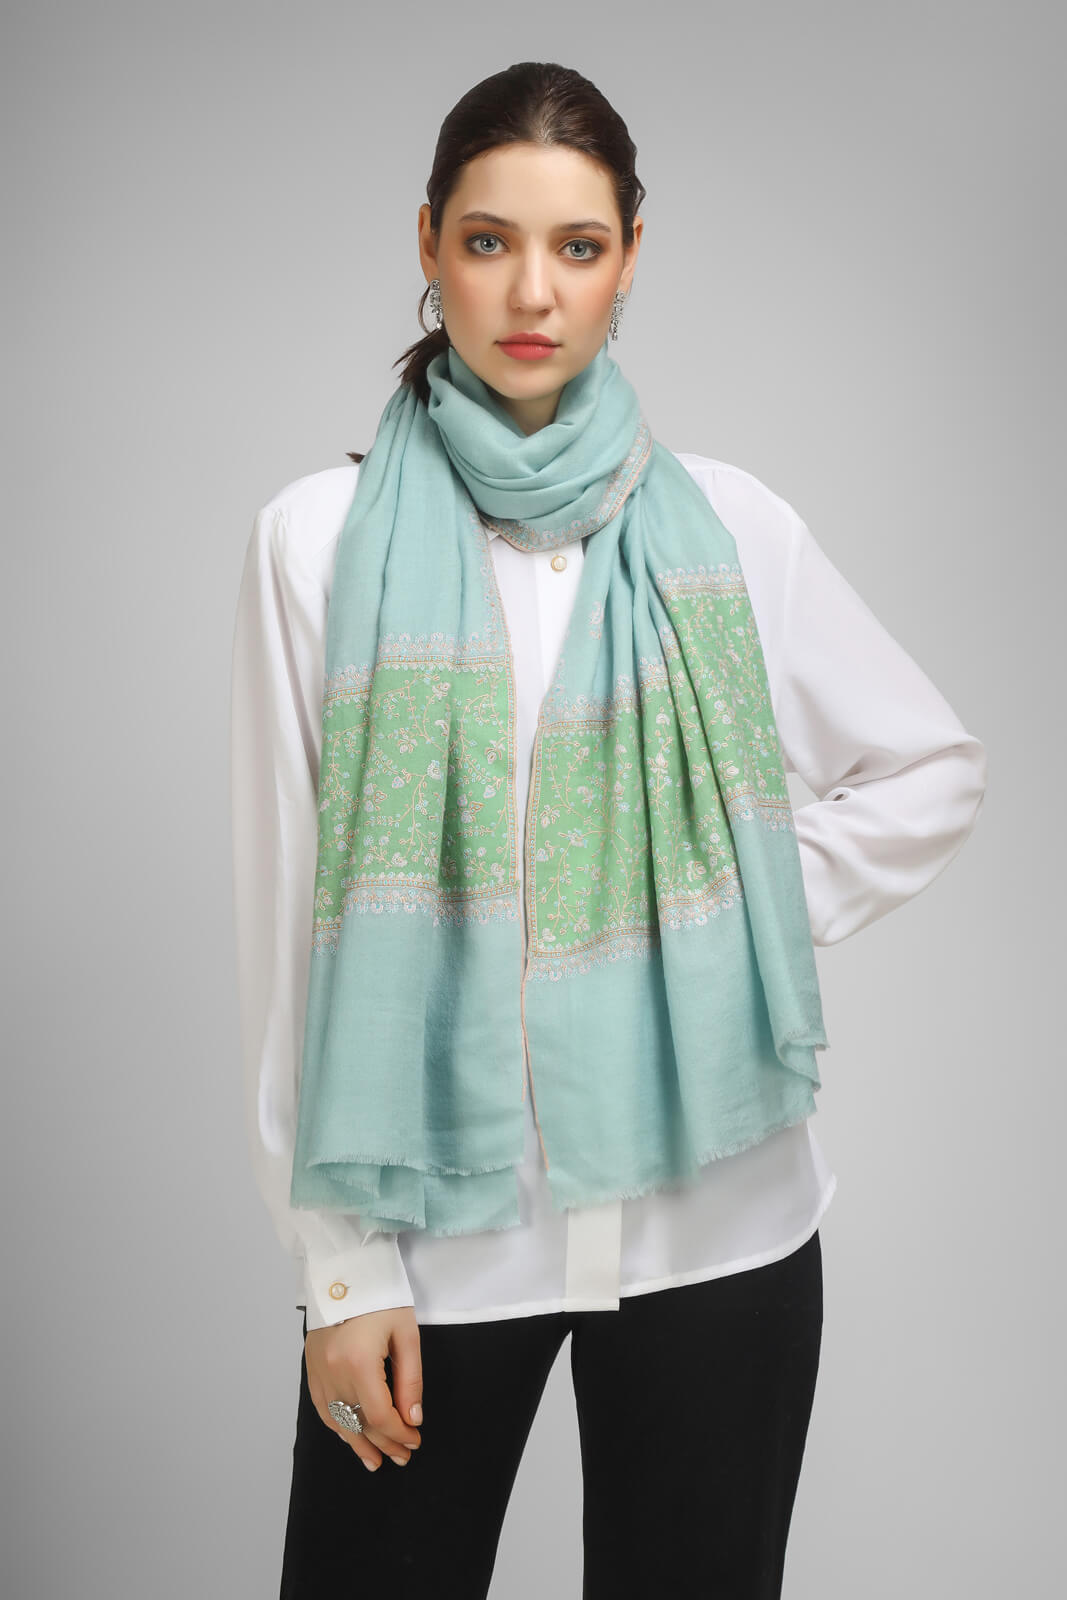 PASHMINA EMBROIDERY STOLE - Light Turquoise Pashmina Paladaar stole - We deliver exquisite products to your doorstep in the United States